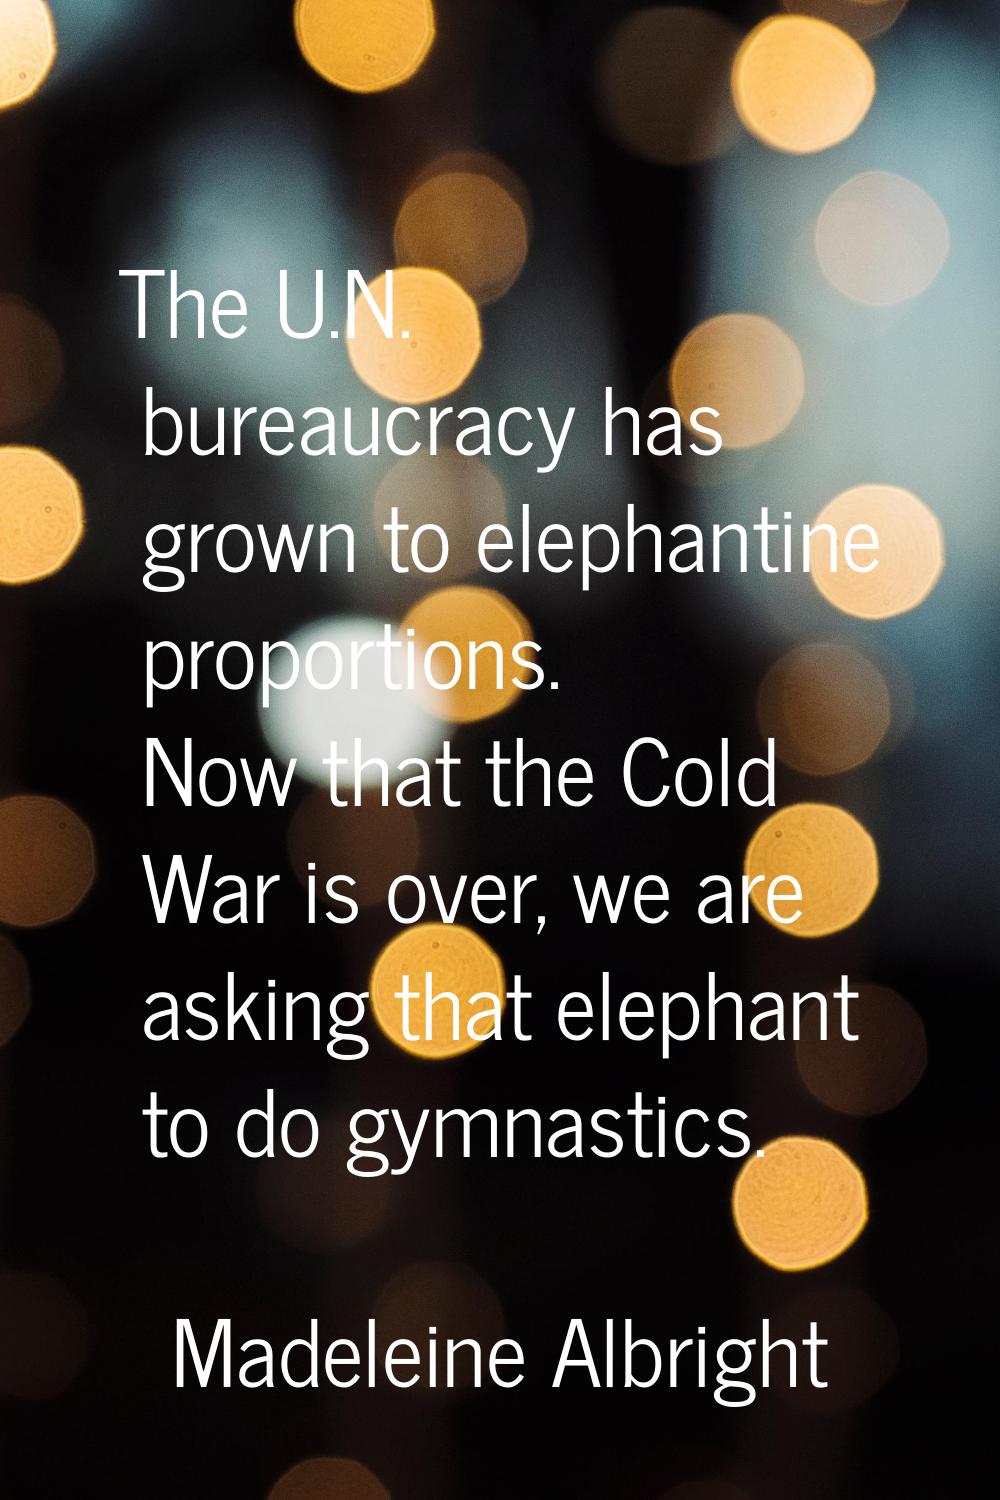 The U.N. bureaucracy has grown to elephantine proportions. Now that the Cold War is over, we are as